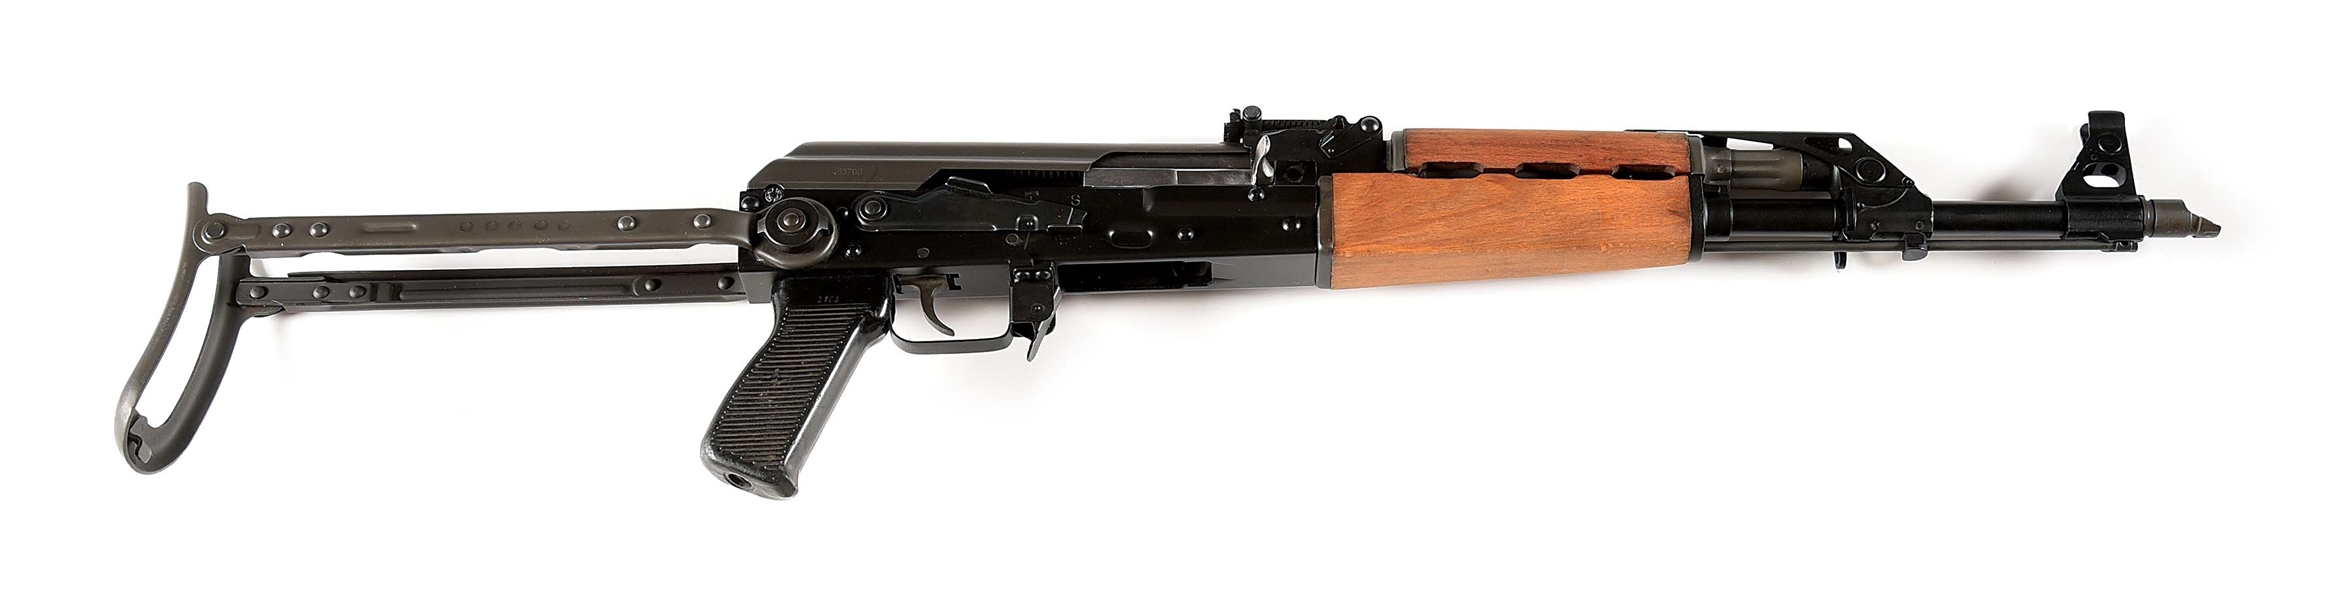 (M) CENTURY ARMS M70AB2 SEMI-AUTOMATIC RIFLE WITH UNDER FOLDING STOCK.